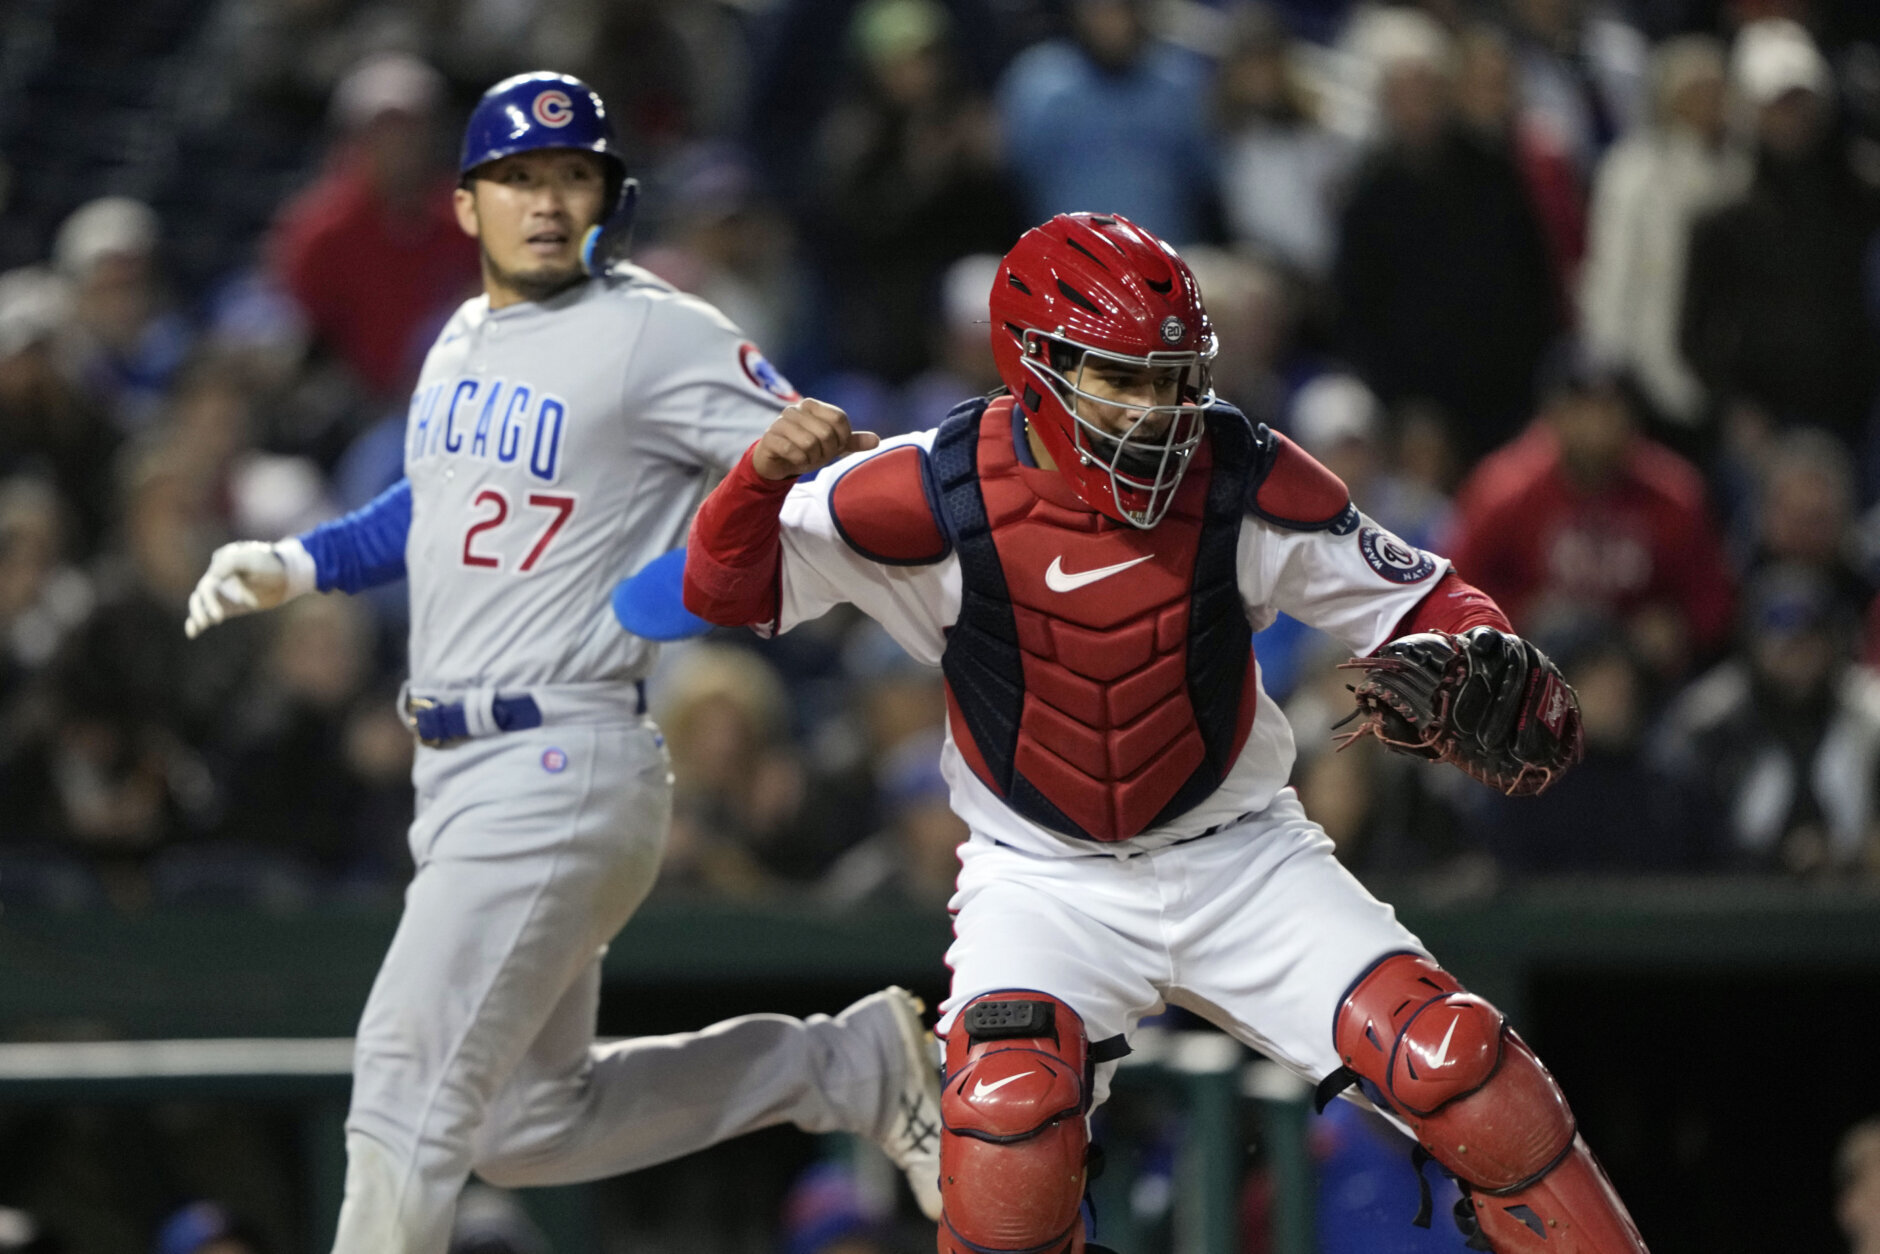 Abrams, Nats squeeze past Cubs for 2nd straight night, 2-1 – NBC